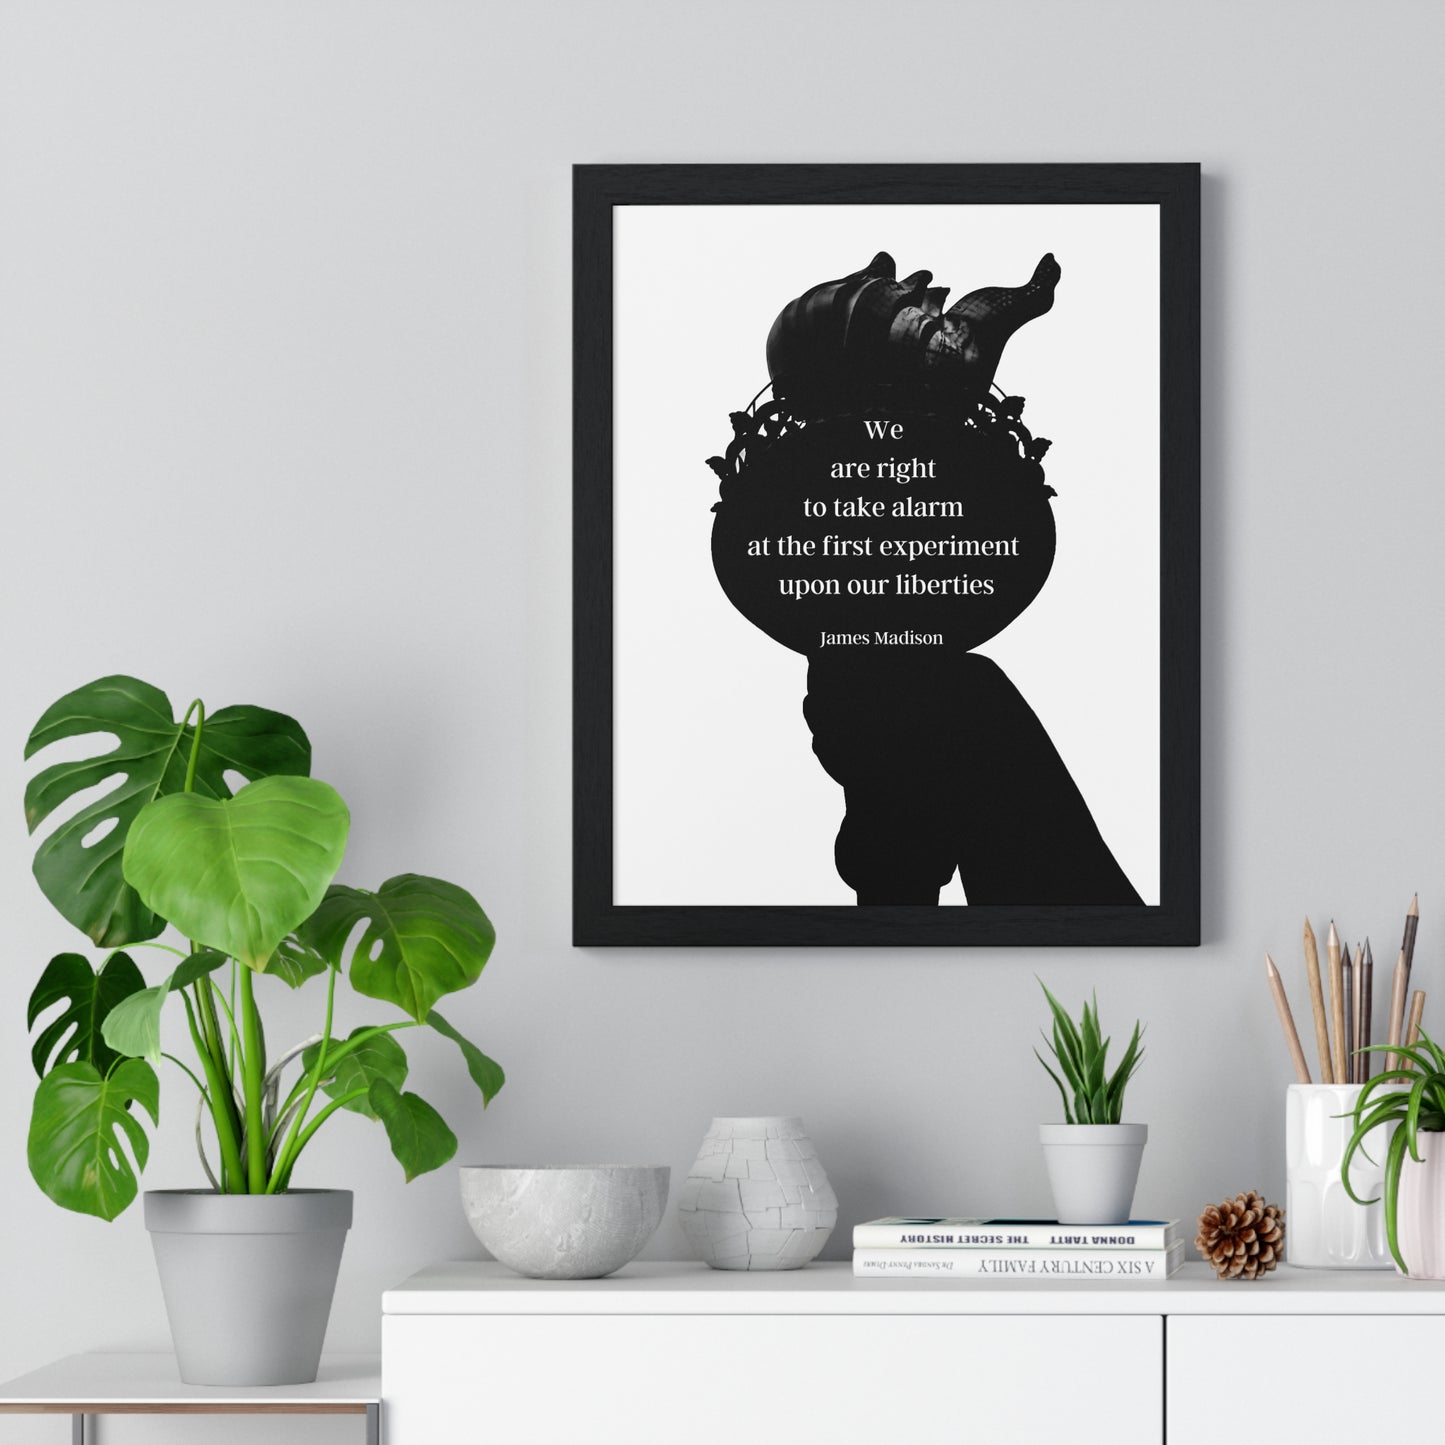 James Madison Quote 4, Poster Art, Dark Liberty Torch Print, 4th President of the United States, American Patriots, Statue of Liberty, Democracy, Freedom, Justice, Political Art, Poster Prints, Presidential Quotes, Inspirational Quotes